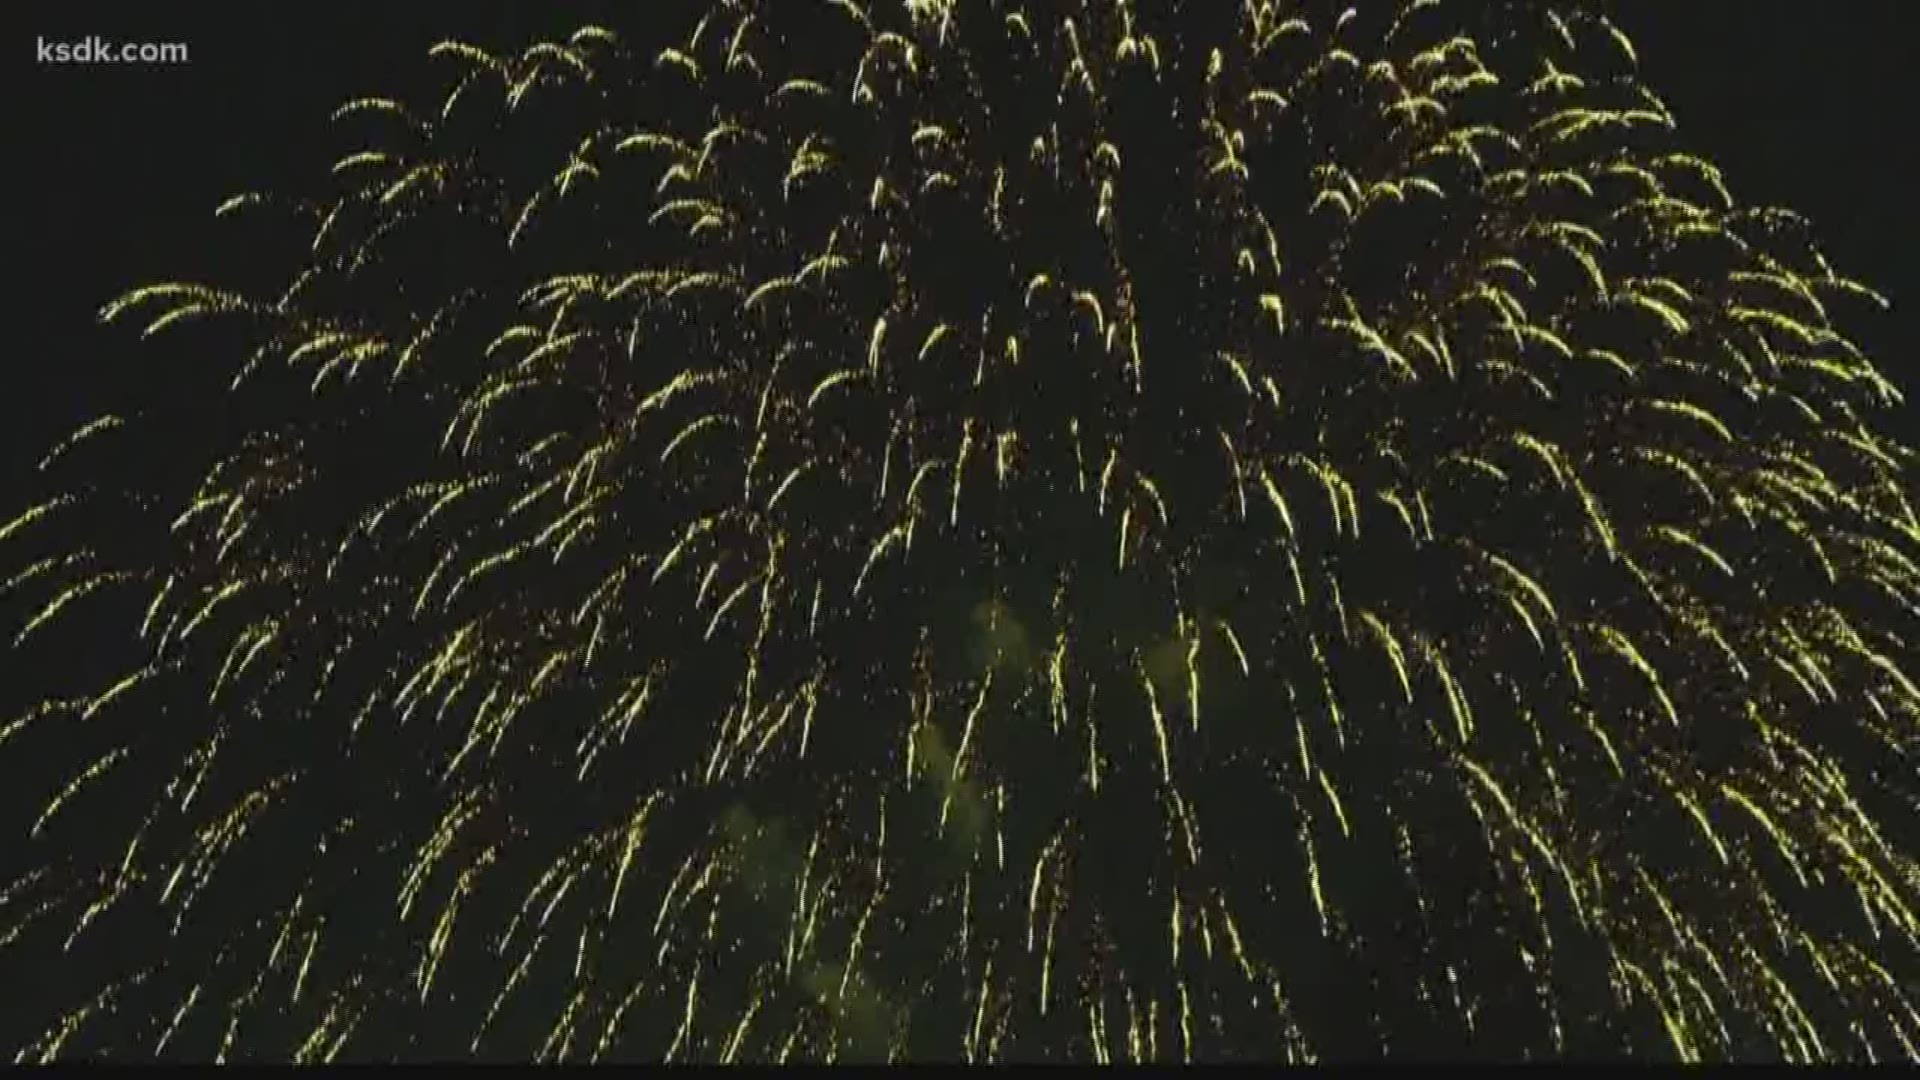 Shooting off fireworks in St. Louis is illegal, but rarely enforced. But police say they will crack down on fireworks this year.